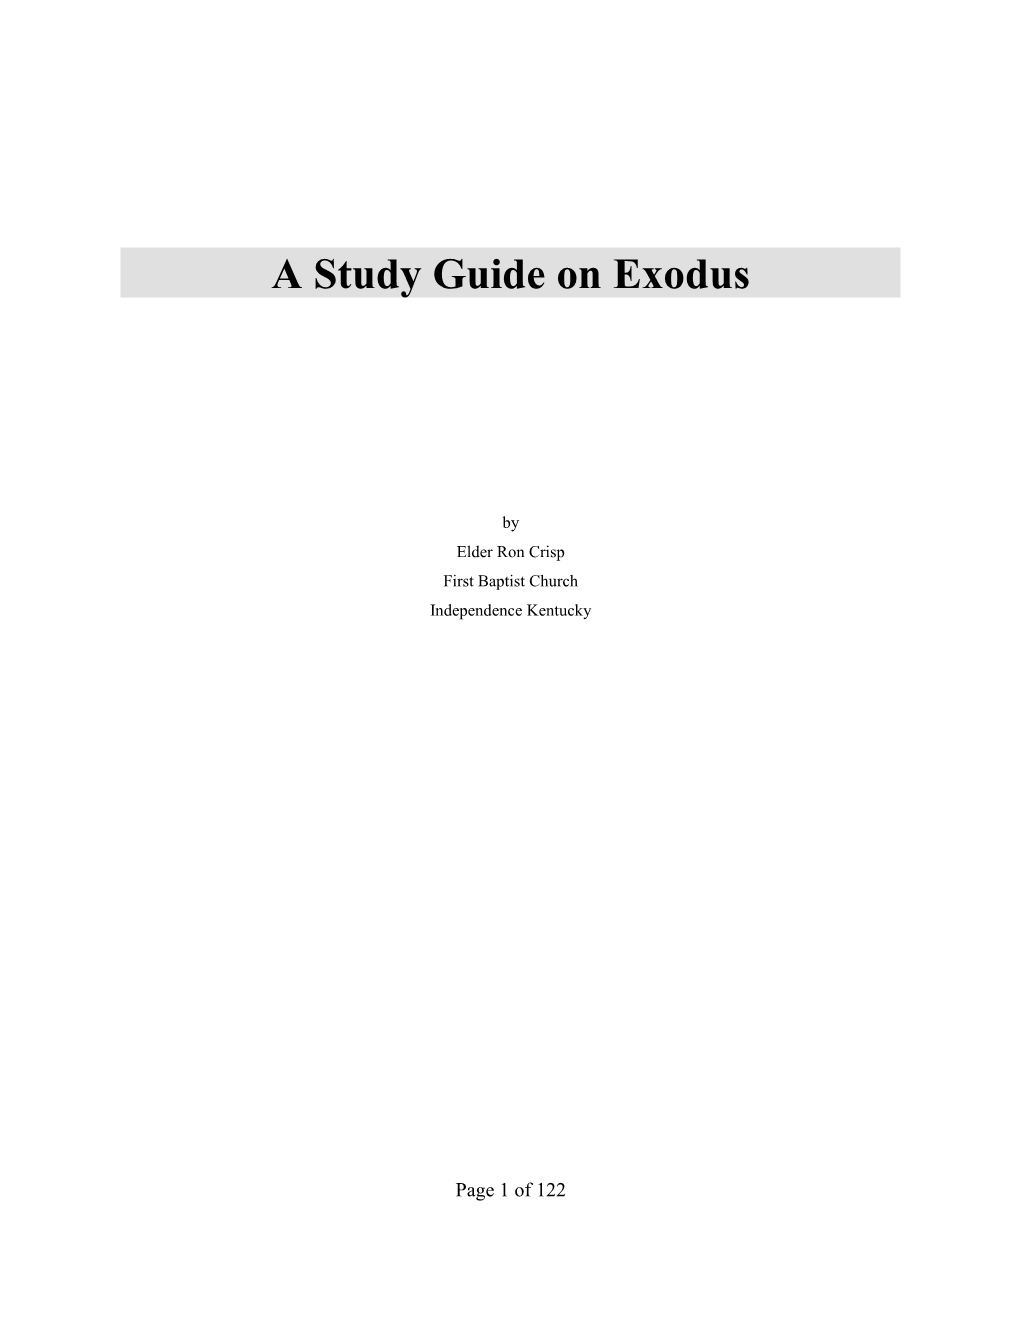 A Study Guide on Exodus